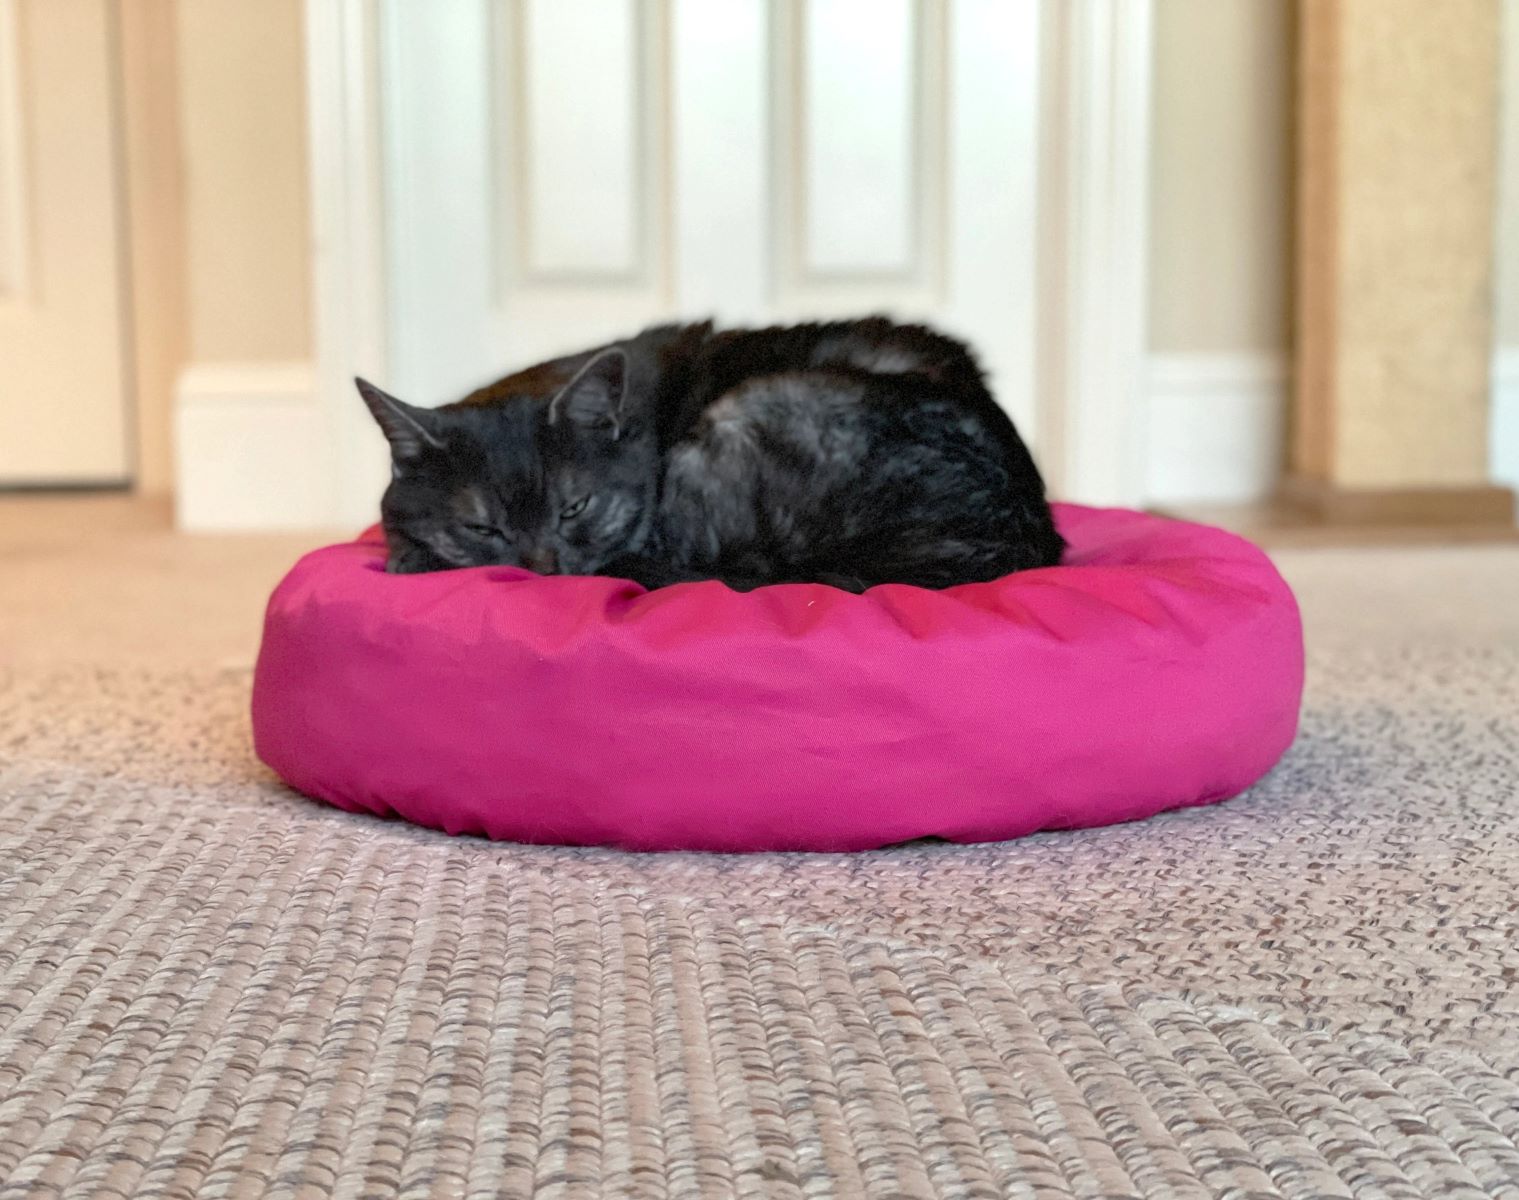 How To Clean Cat Pee From A Bean Bag